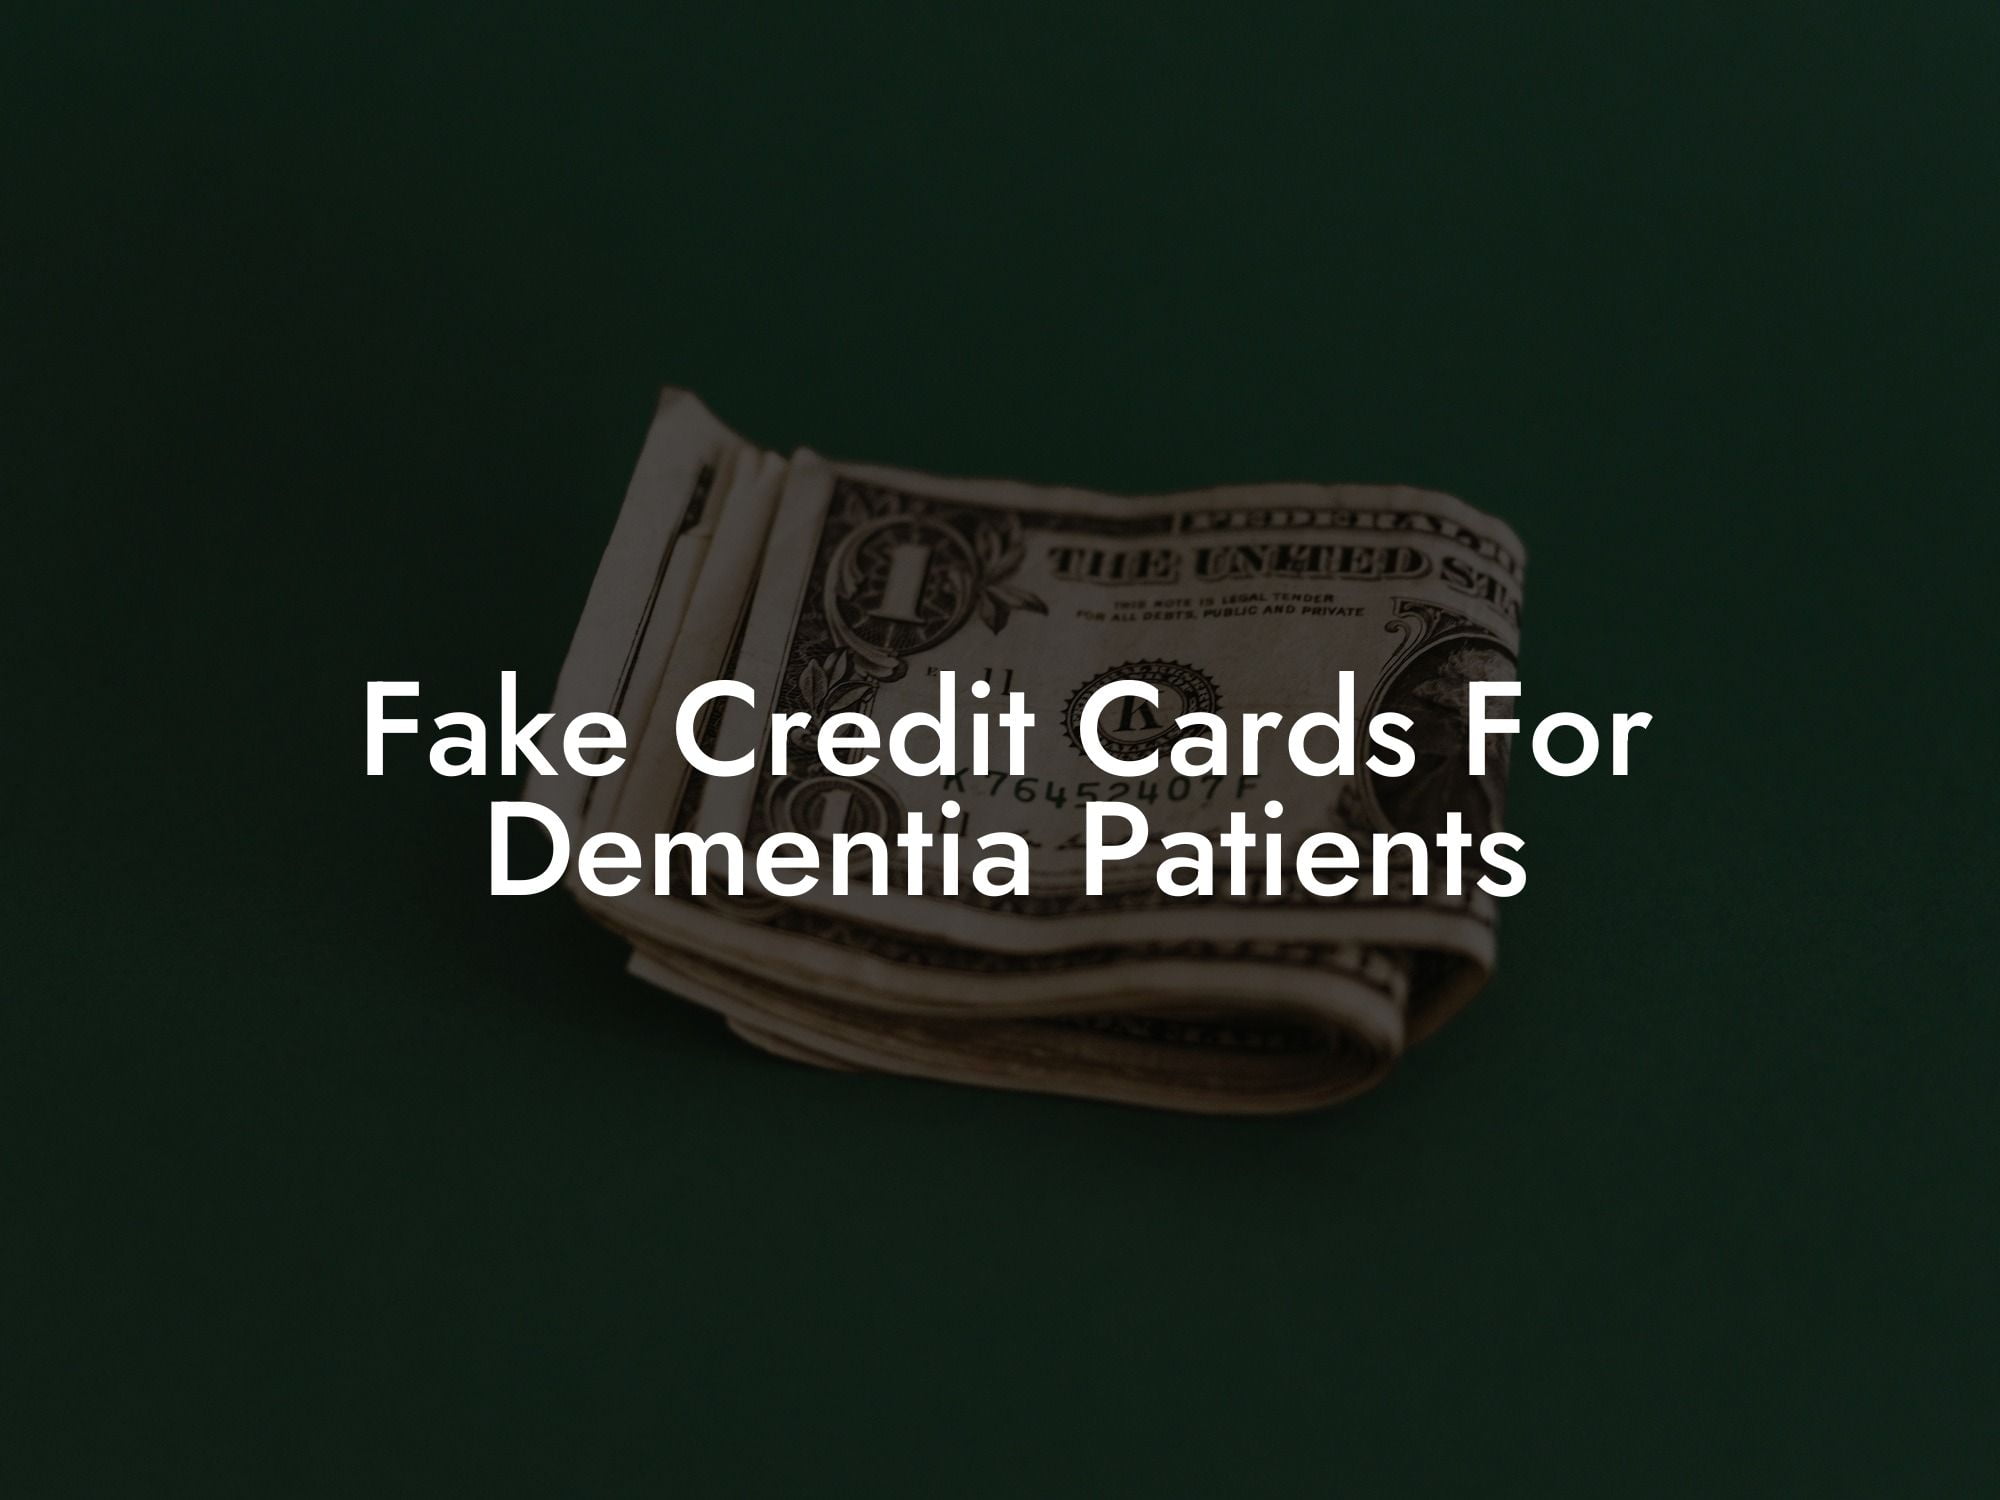 Fake Credit Cards For Dementia Patients